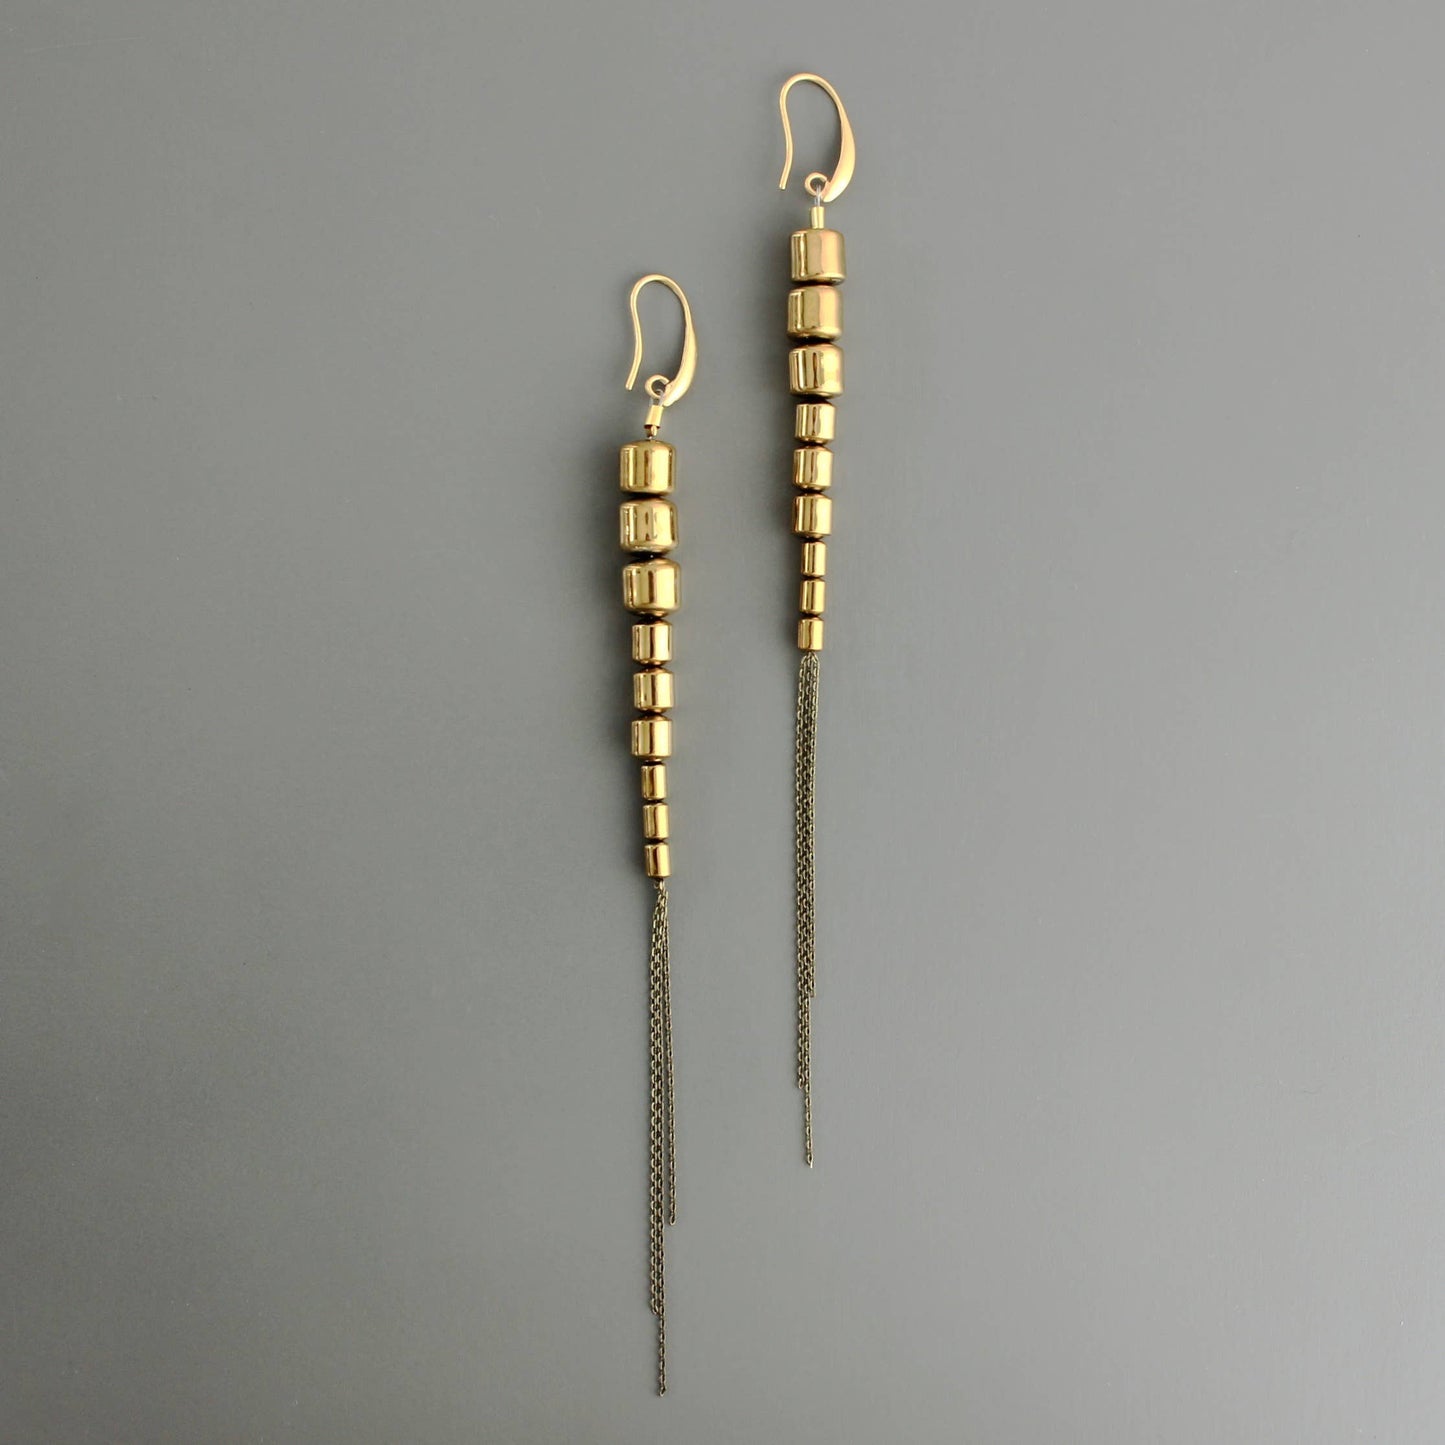 Super long shiny earrings are a 70s Studio 54 vibe. 18k gold plated brass hooks with 9  plated hematite beads and brass chain. 6.5 inches from top of hook to bottom of chain. Against a grey background